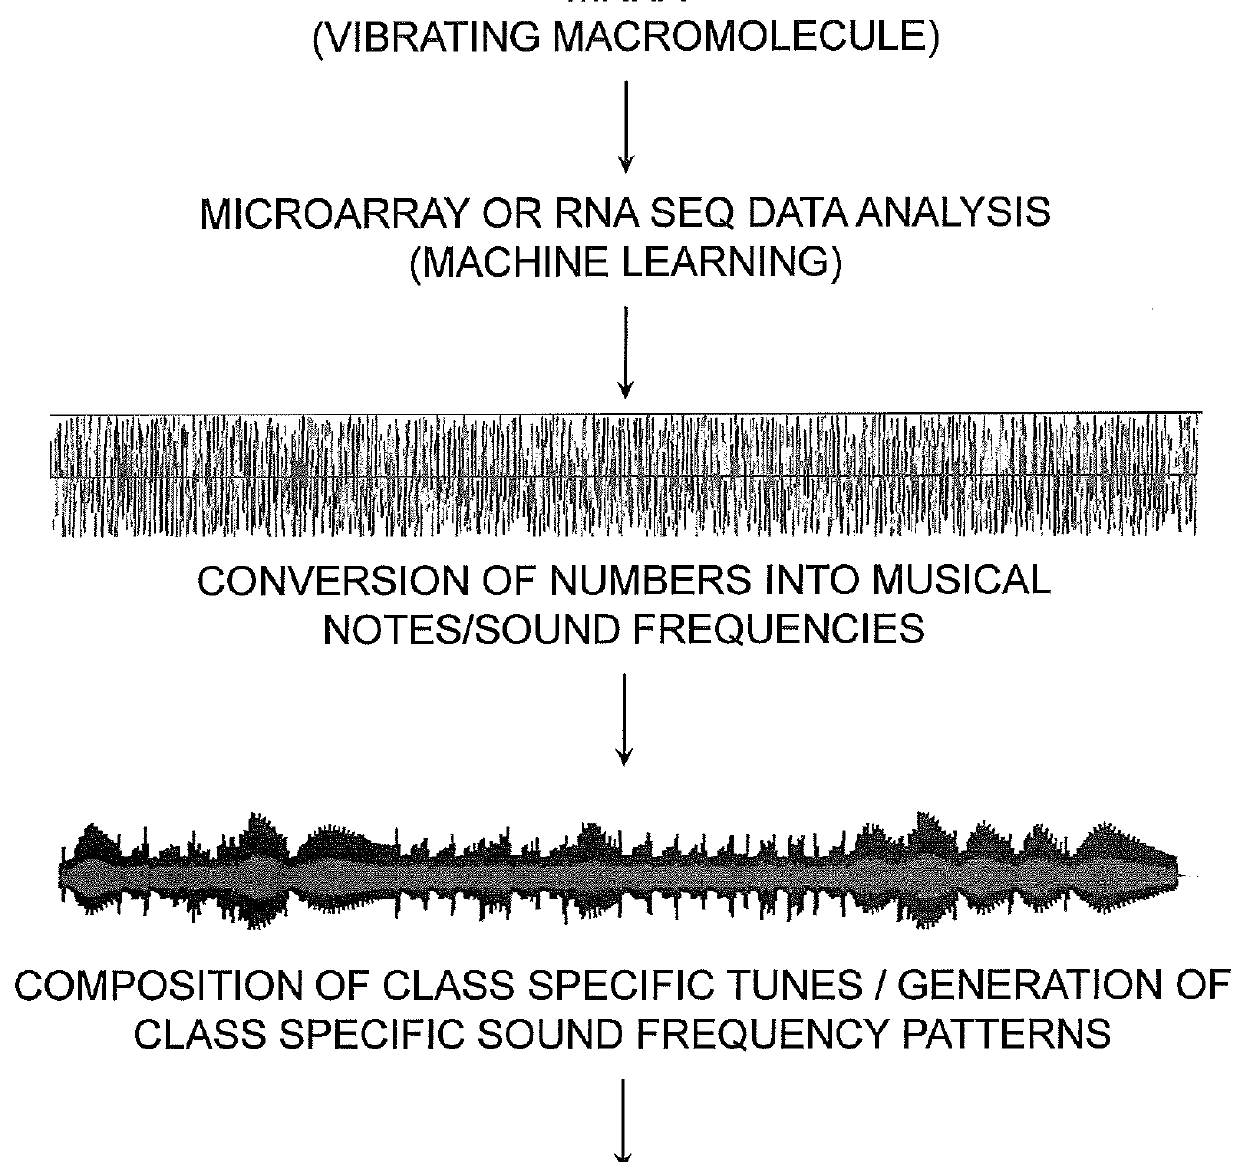 A mathematical musical orchestral method for predicting classes of patients for medical treatment